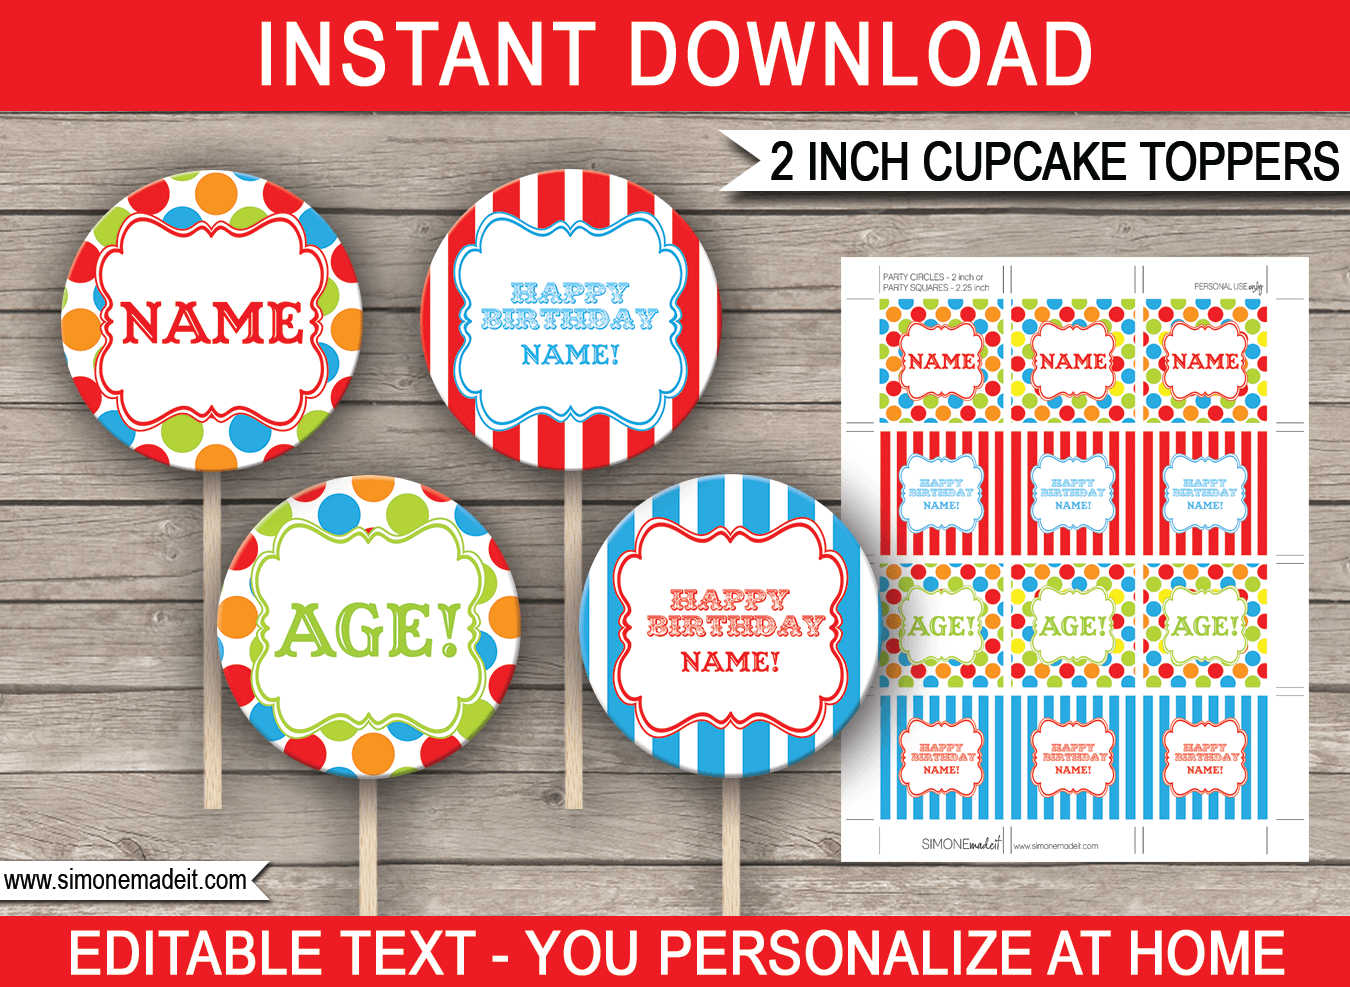 Printable Carnival Cupcake Toppers Template | Carnival or Circus Theme Decorations | 2 inch | Gift Tags | INSTANT DOWNLOAD via simonemadeit.com